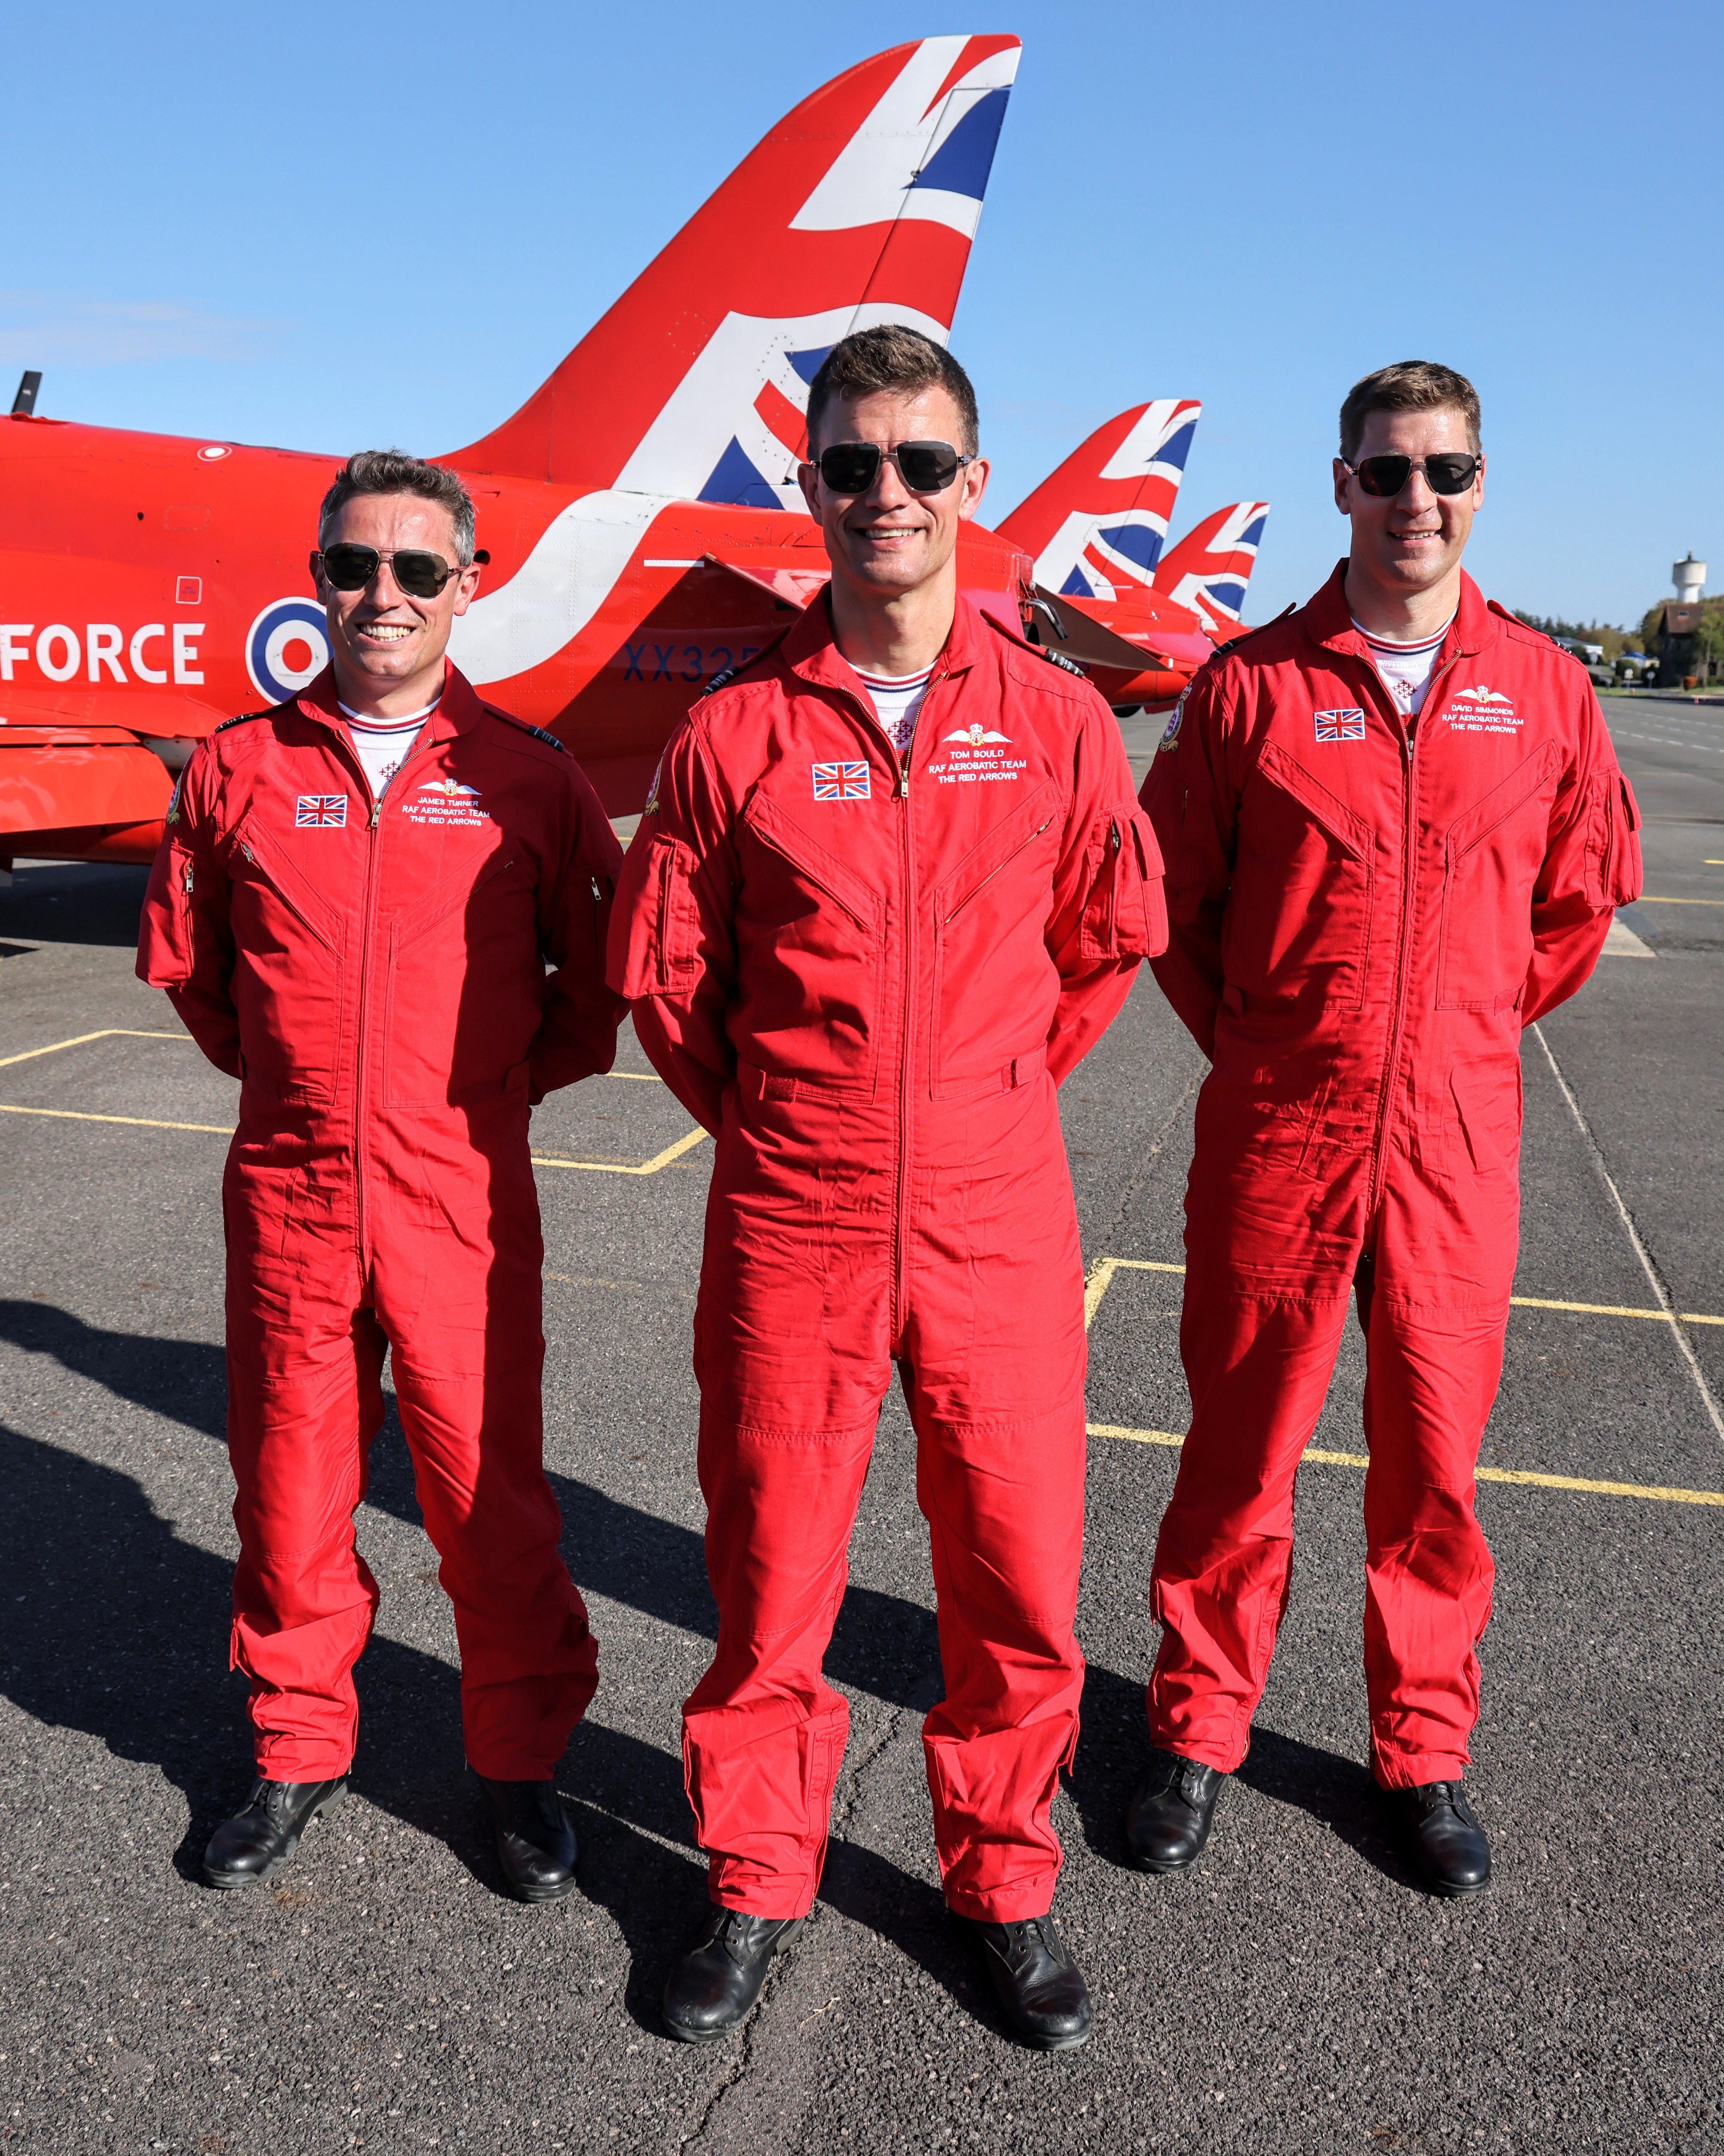 Left-to-right: Squadron Leader James Turner, Squadron Leader Tom Bould and Flight Lieutenant David Simmonds